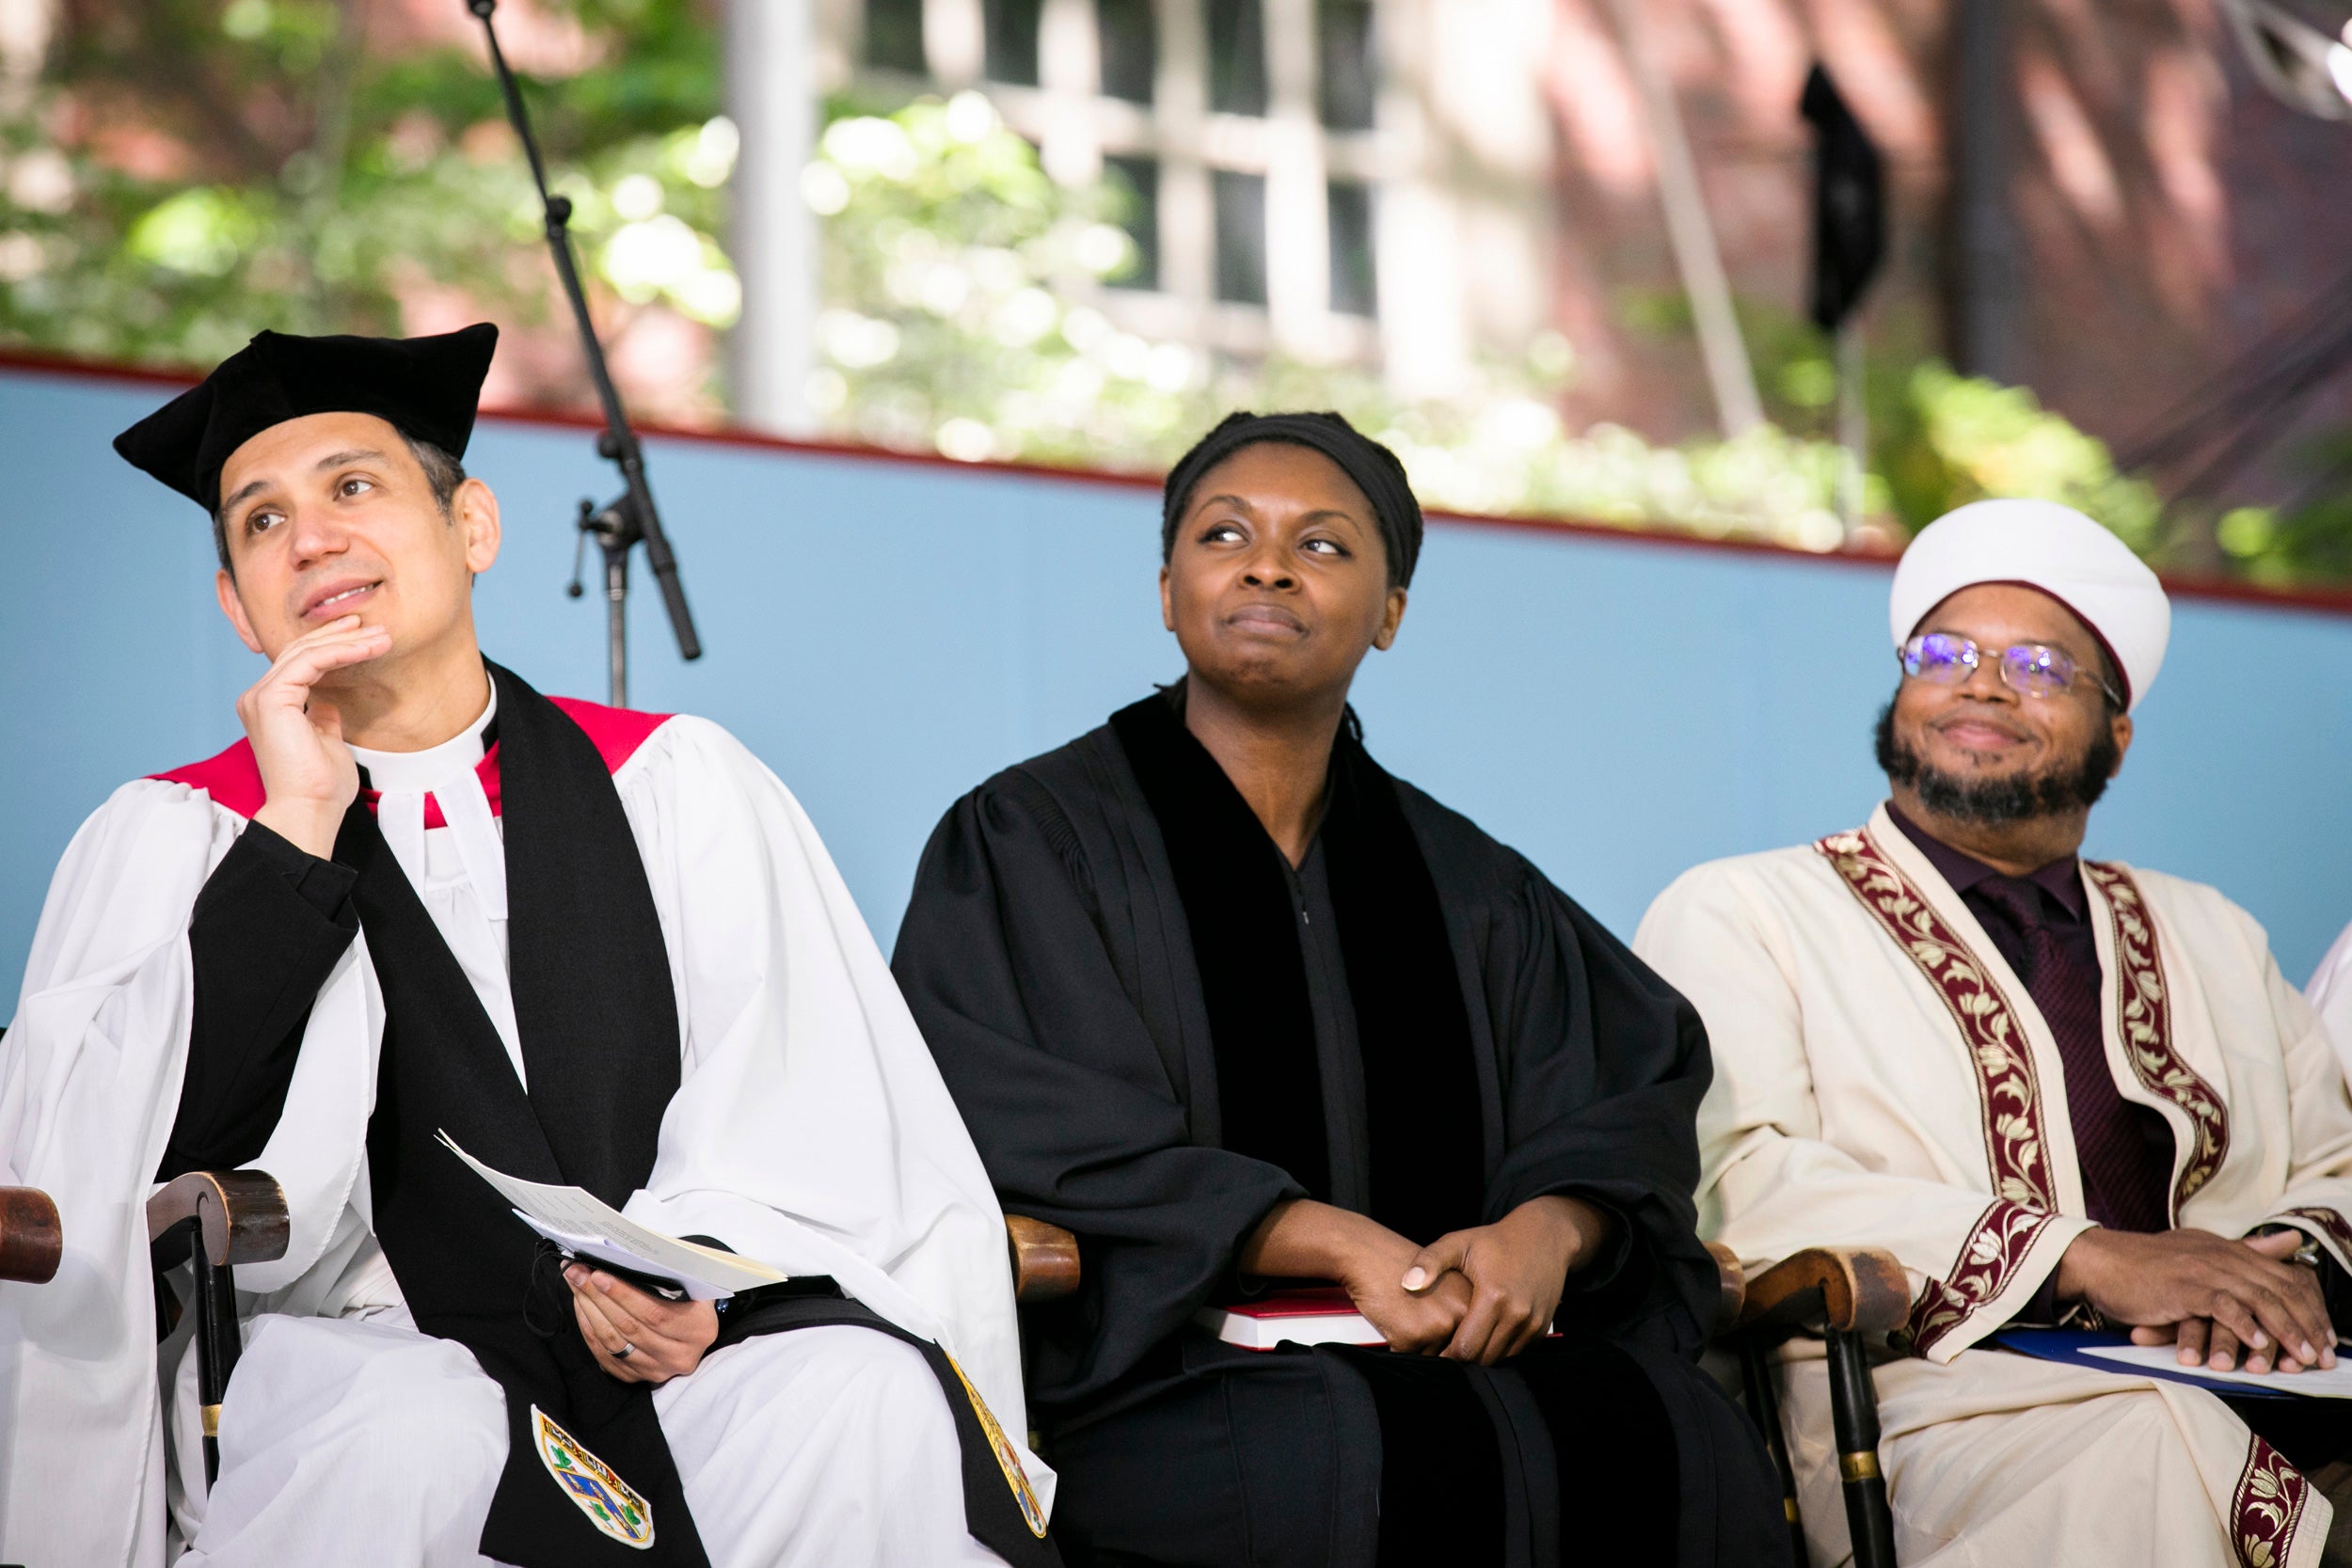 Pusey Minister Matthew Potts (from left), Dr. Mia Chandler, and Imam Dr. Khalil Abdur-Rashid listen during the Baccalaureate Service.